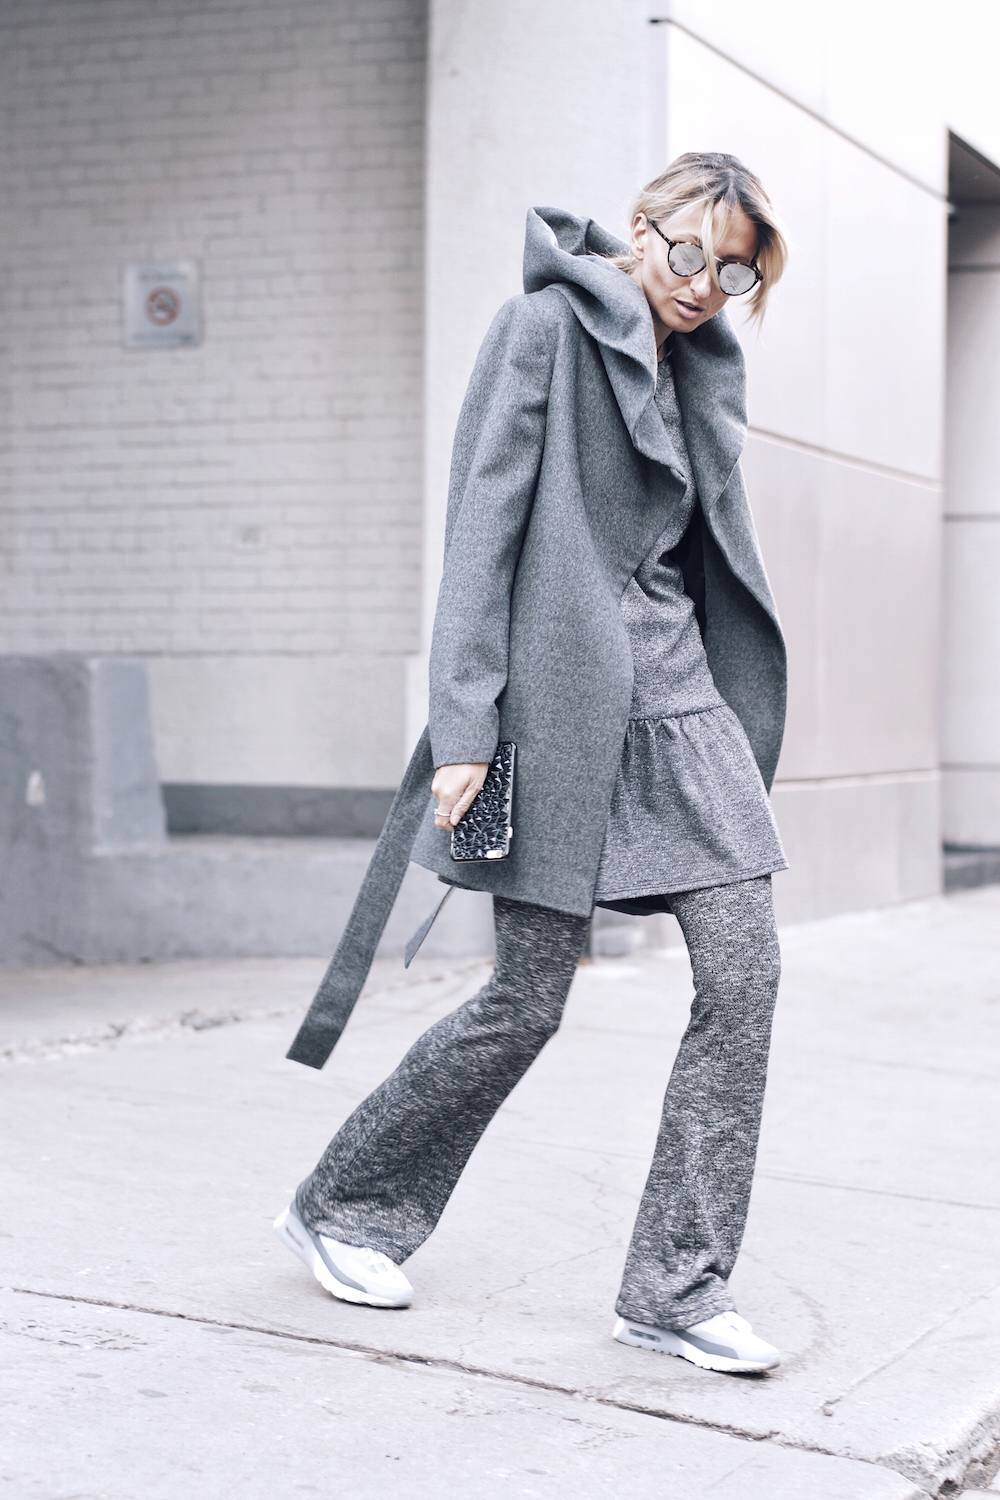 All grey outift monochrome street style 02